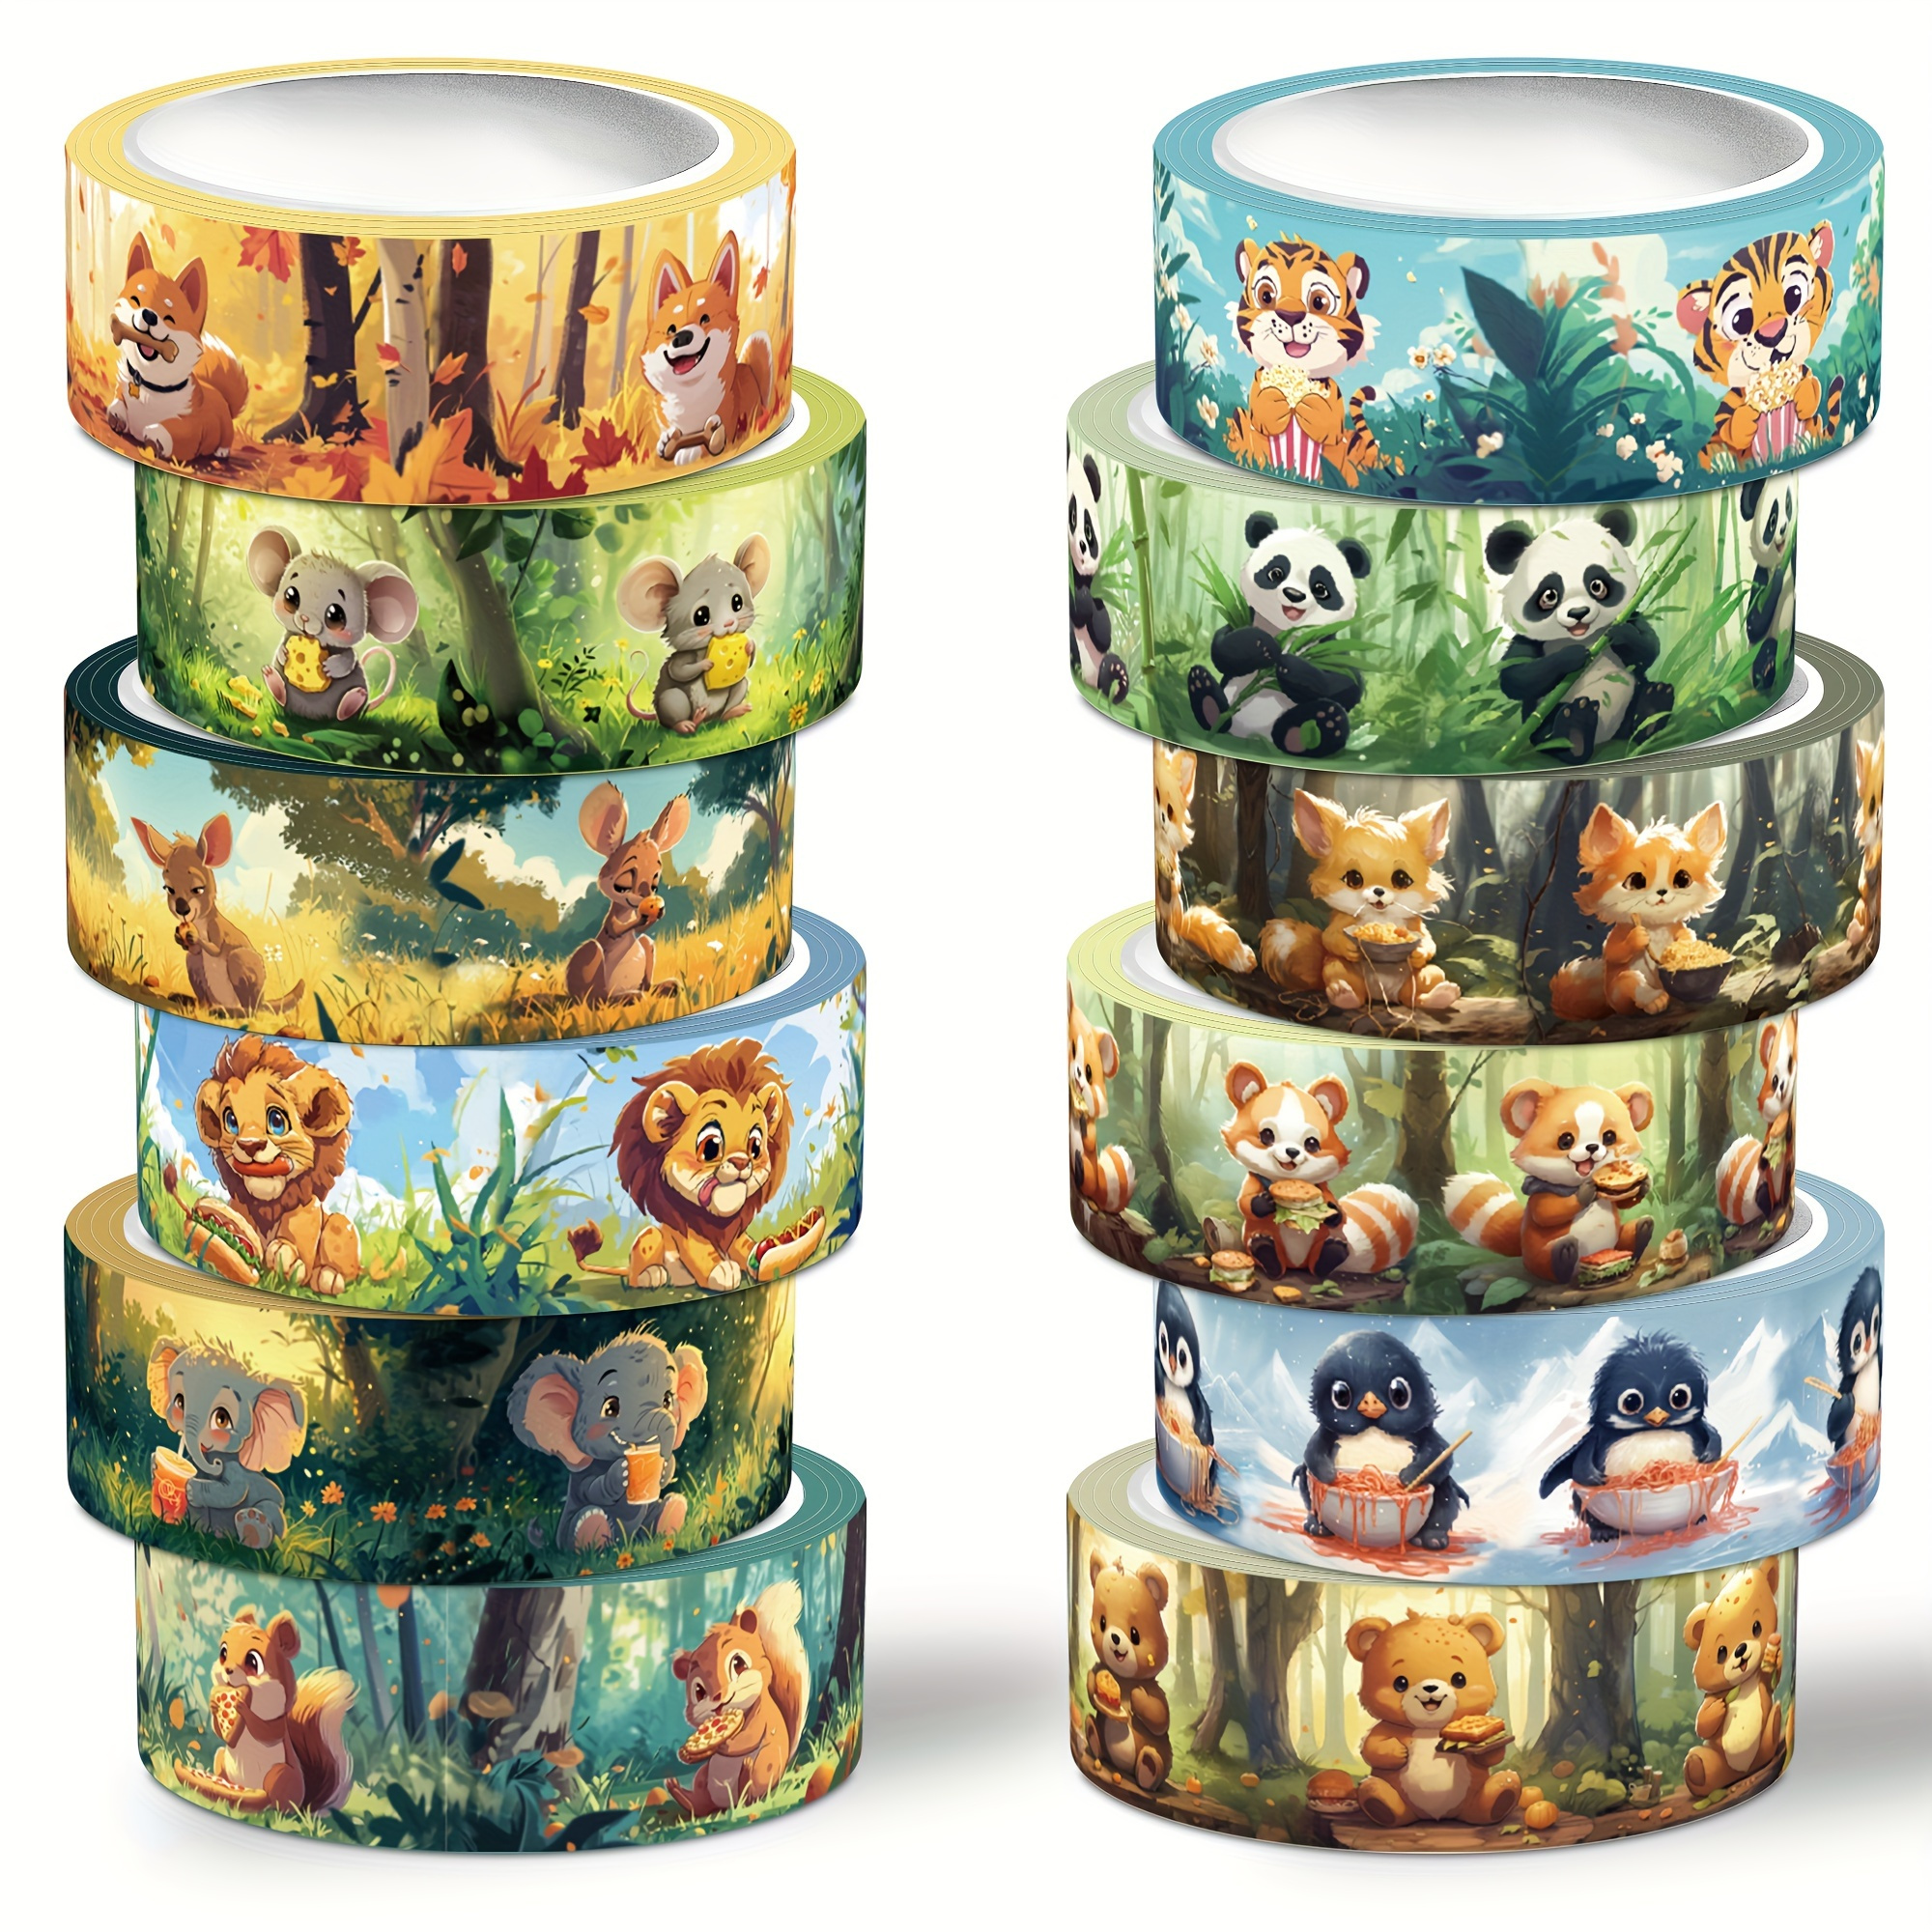 

Adorable Animal Party Washi Tape Set: 12 Rolls Of Cute Animal Decorative Tape, Perfect For Stationery, Scrapbooking, Diy Crafts, And Gift Wrapping